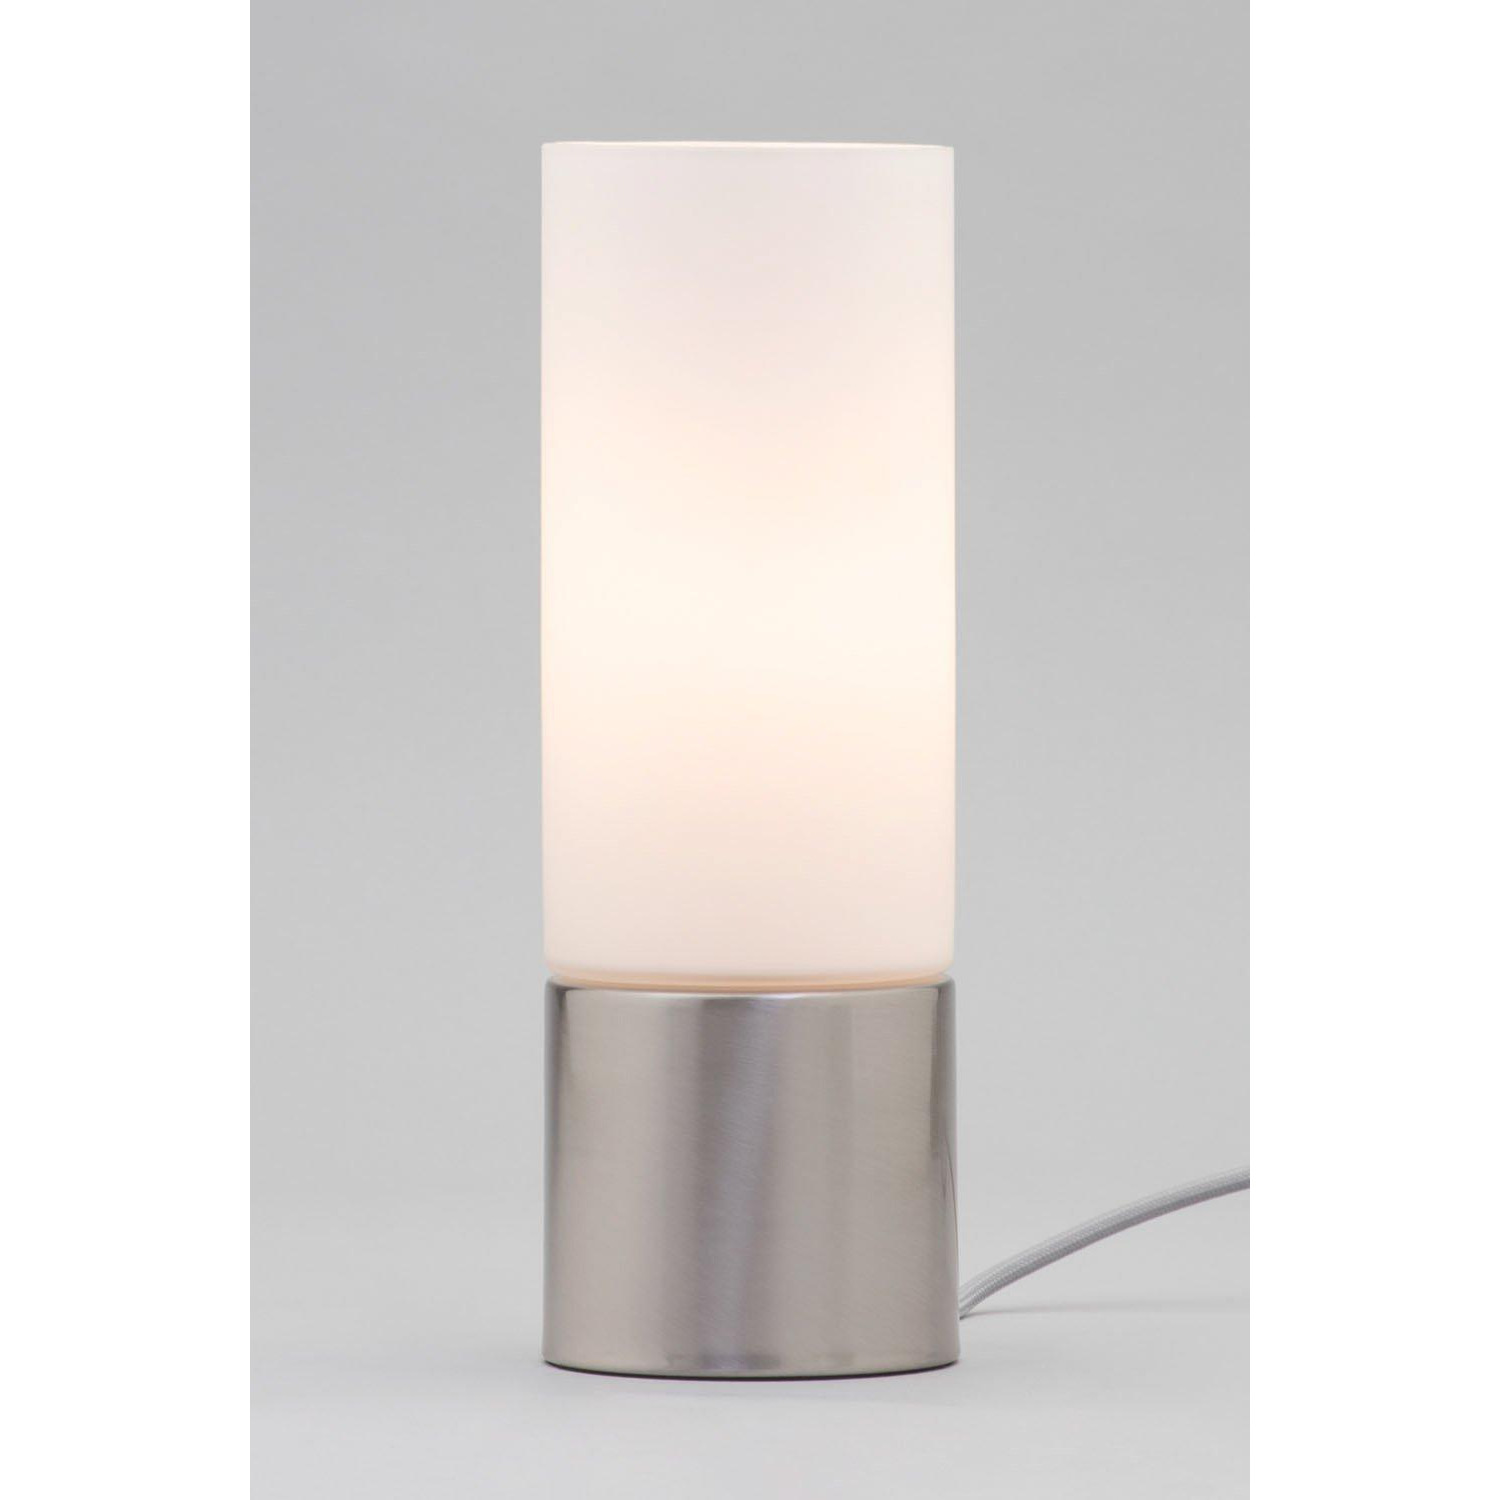 Tilly Touch Sensitive Table Lamp - image 1